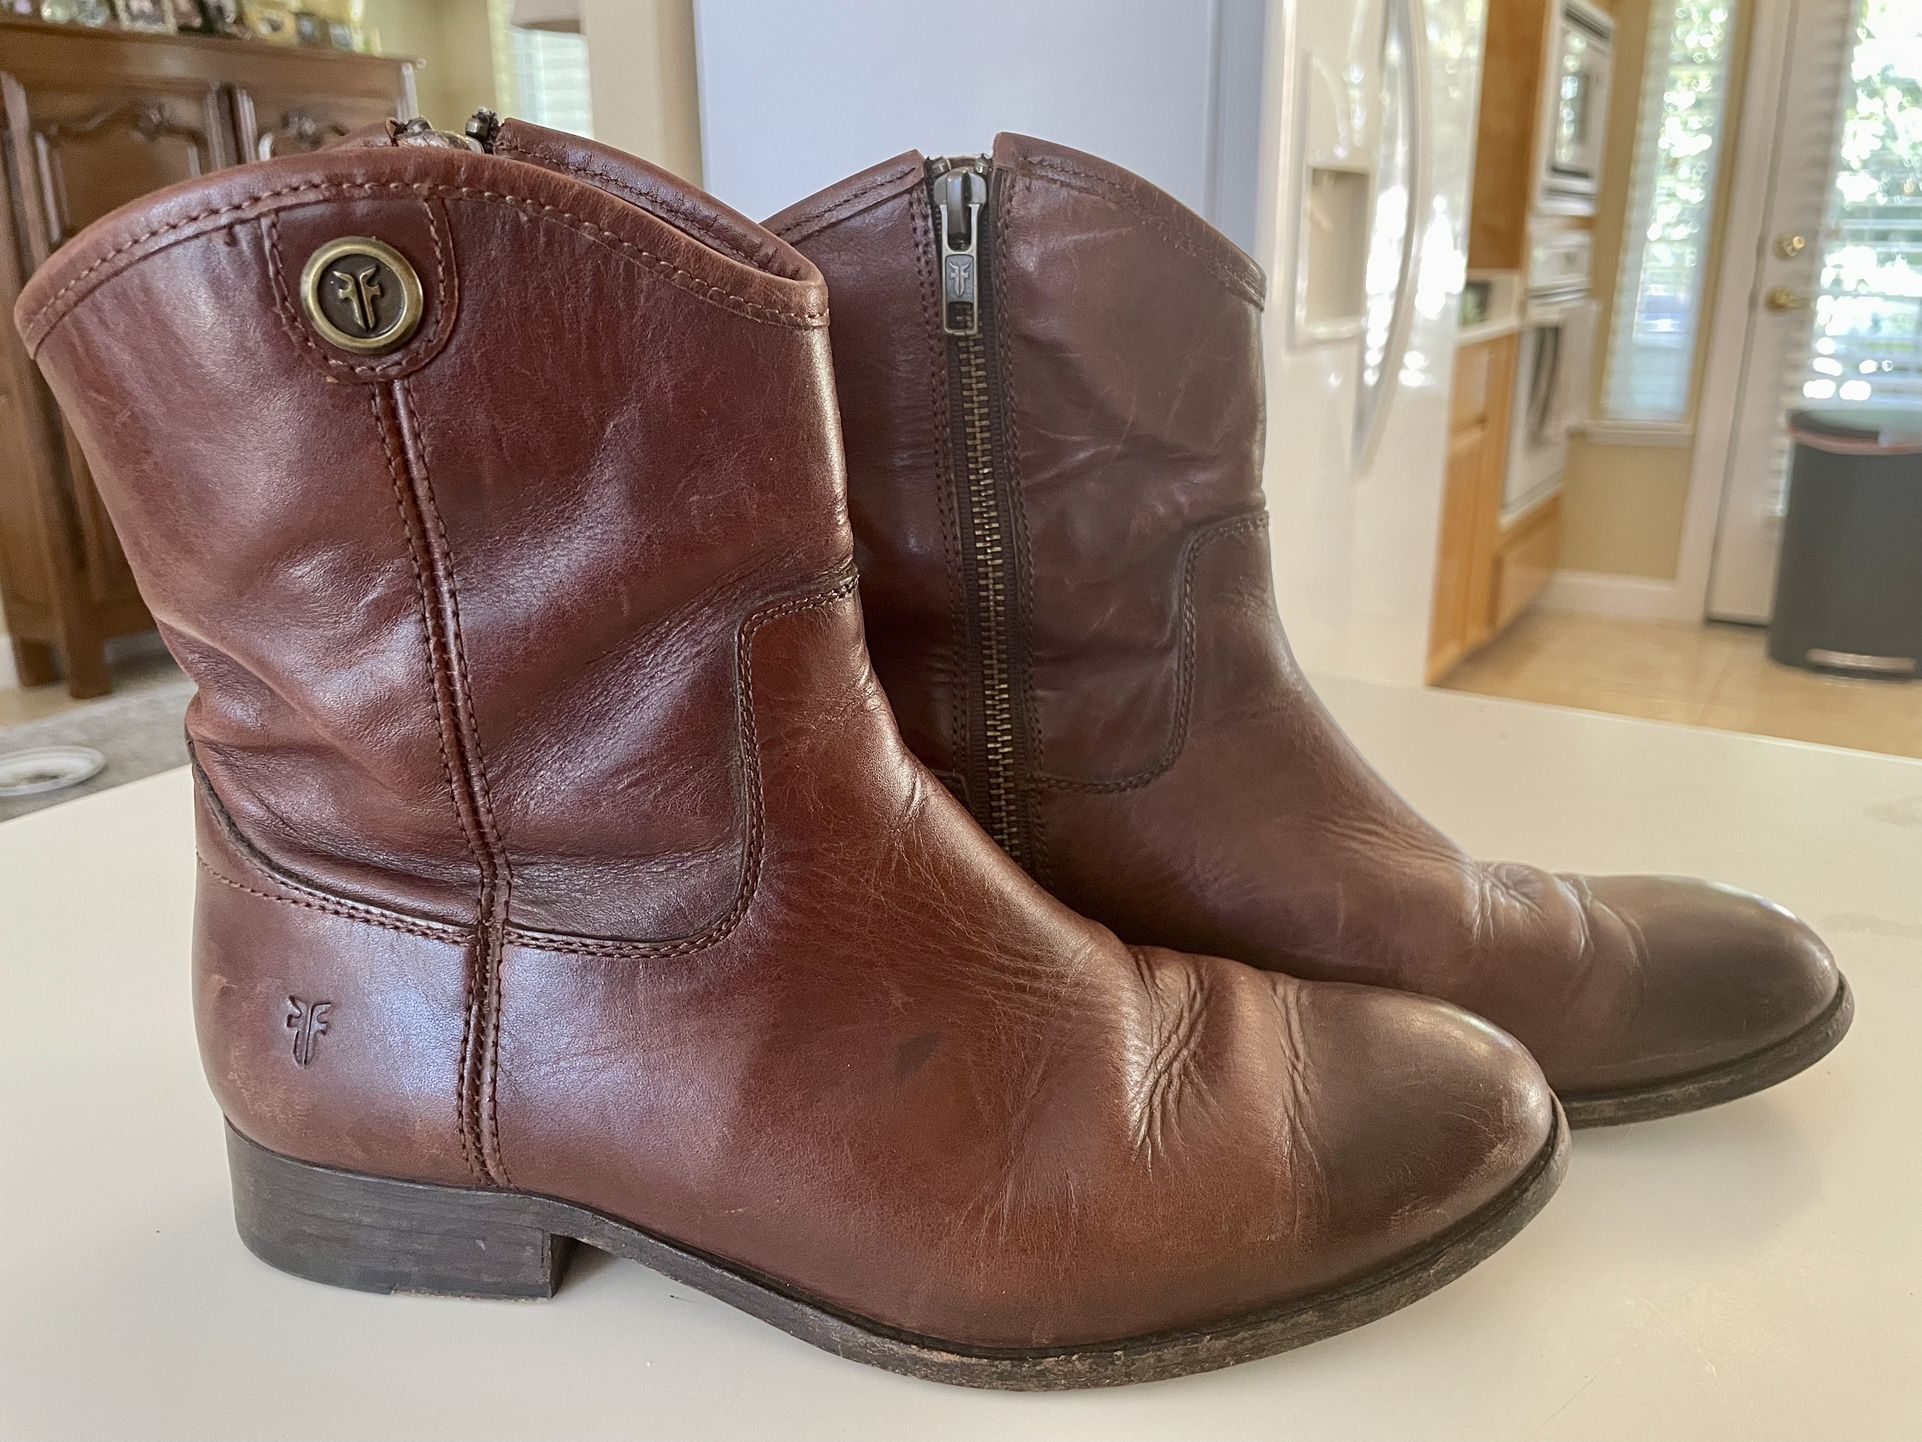 Frye Melissa Button Short Ankle Boots (contact info removed) Redwood Brown Leather Women Size 7B (Medium) 